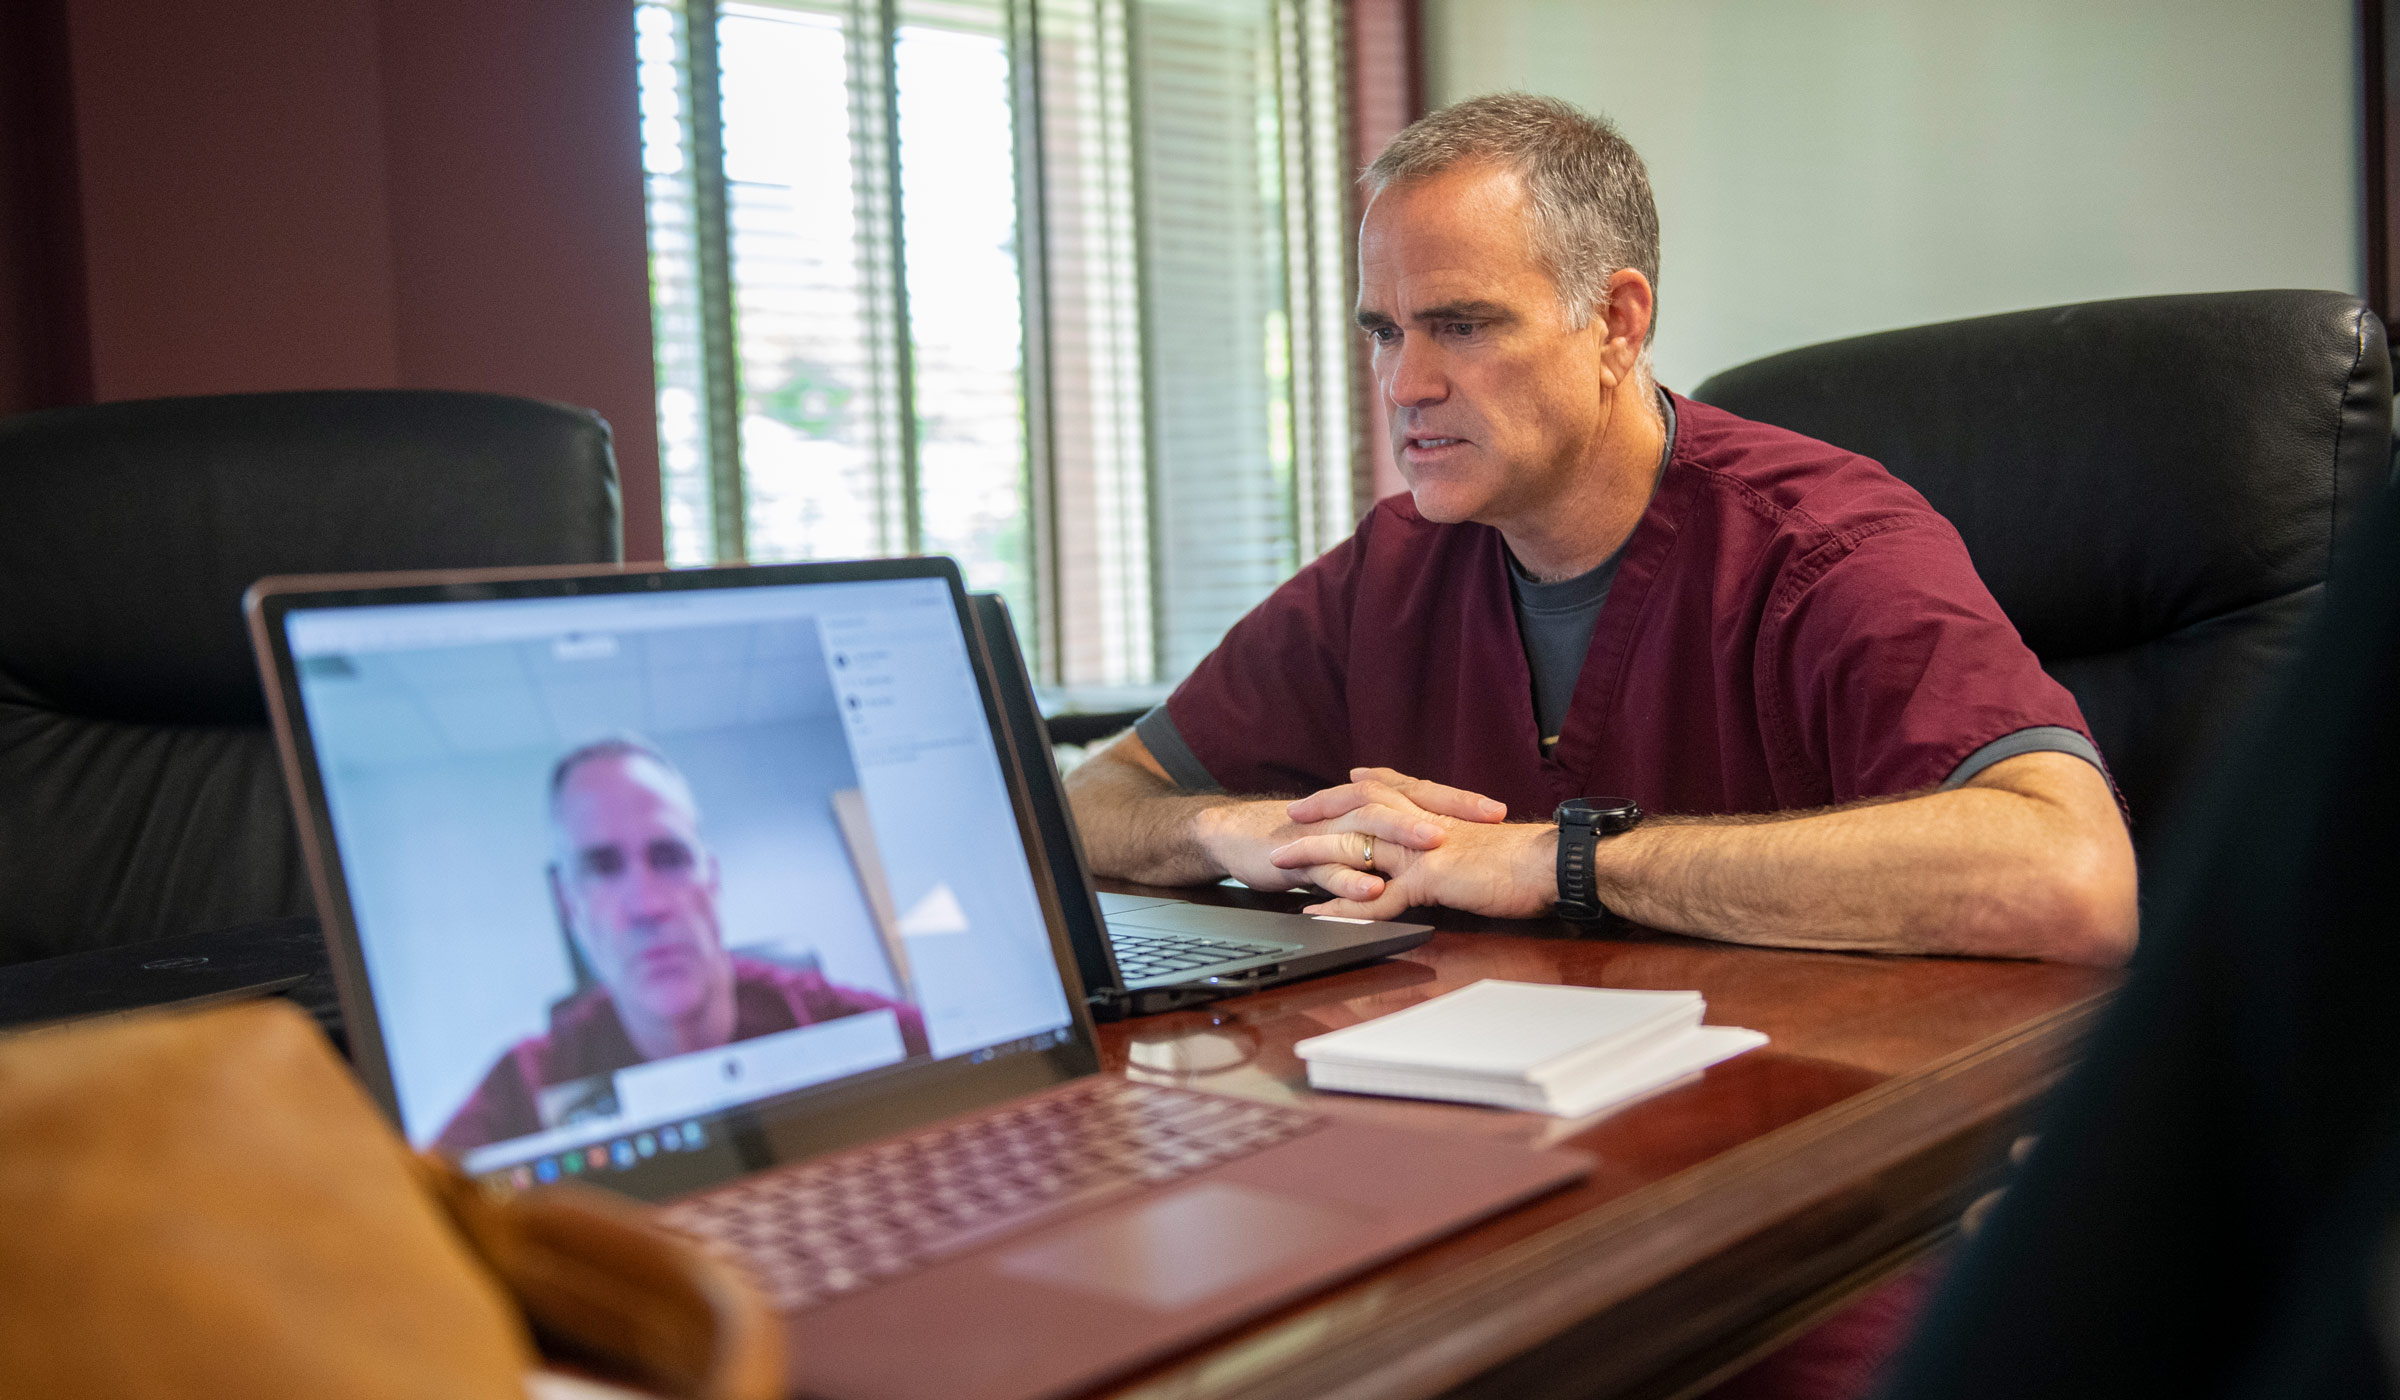 Dr. Clifton Story provides a health update for the Mississippi State community Thursday [April 16] on COVID-19. The online forum continues a series of university information sessions hosted by the director of University Health Services.